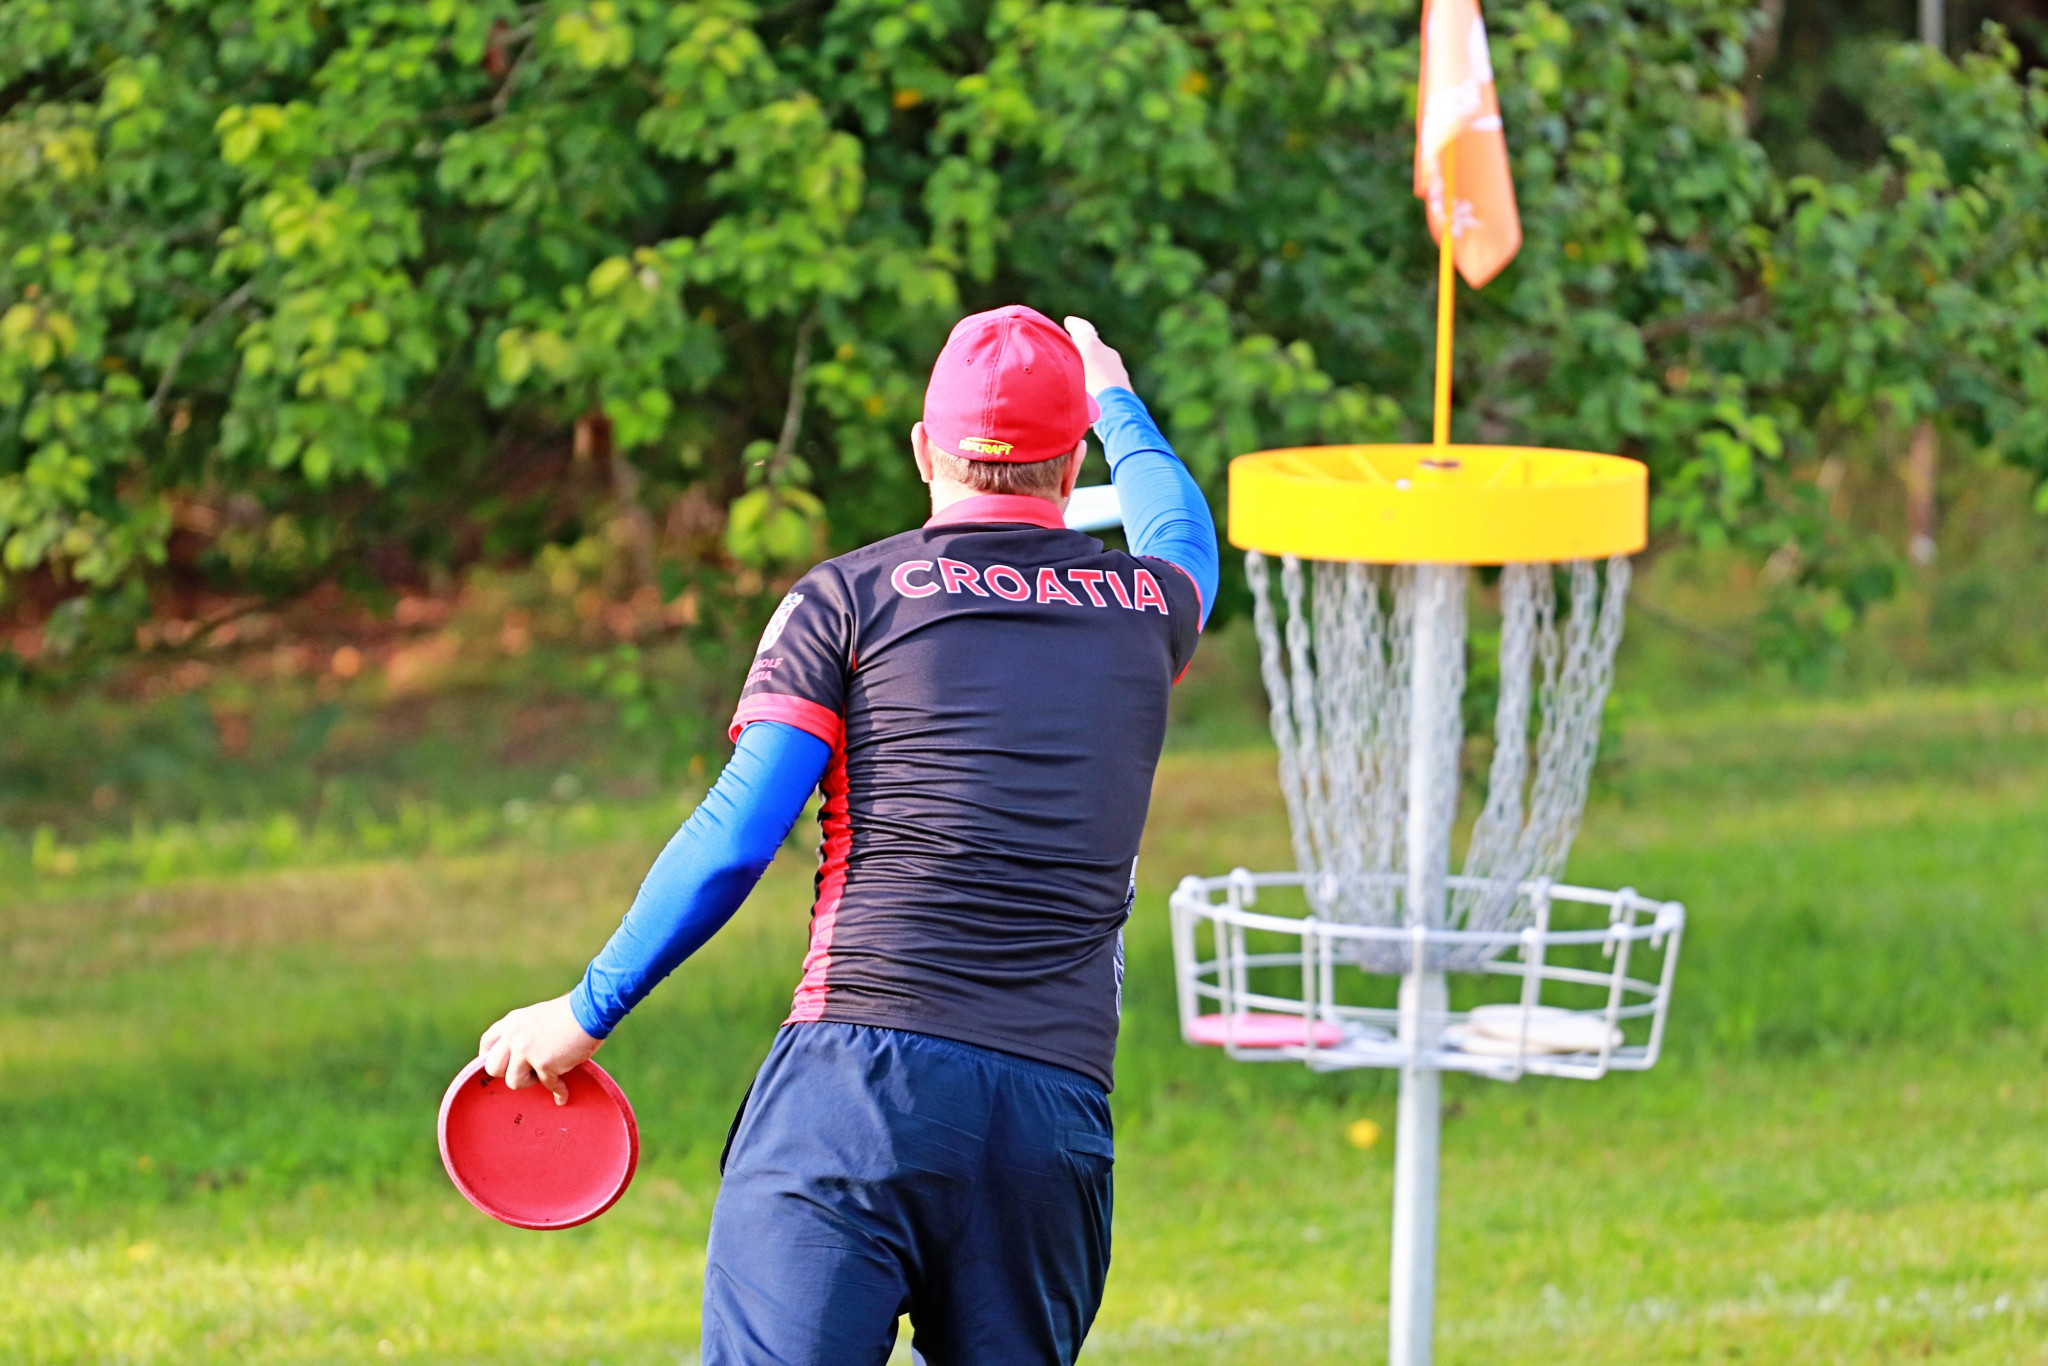 Croatia is among the nations that has seen huge growth in disc golf in recent years ©WFDF